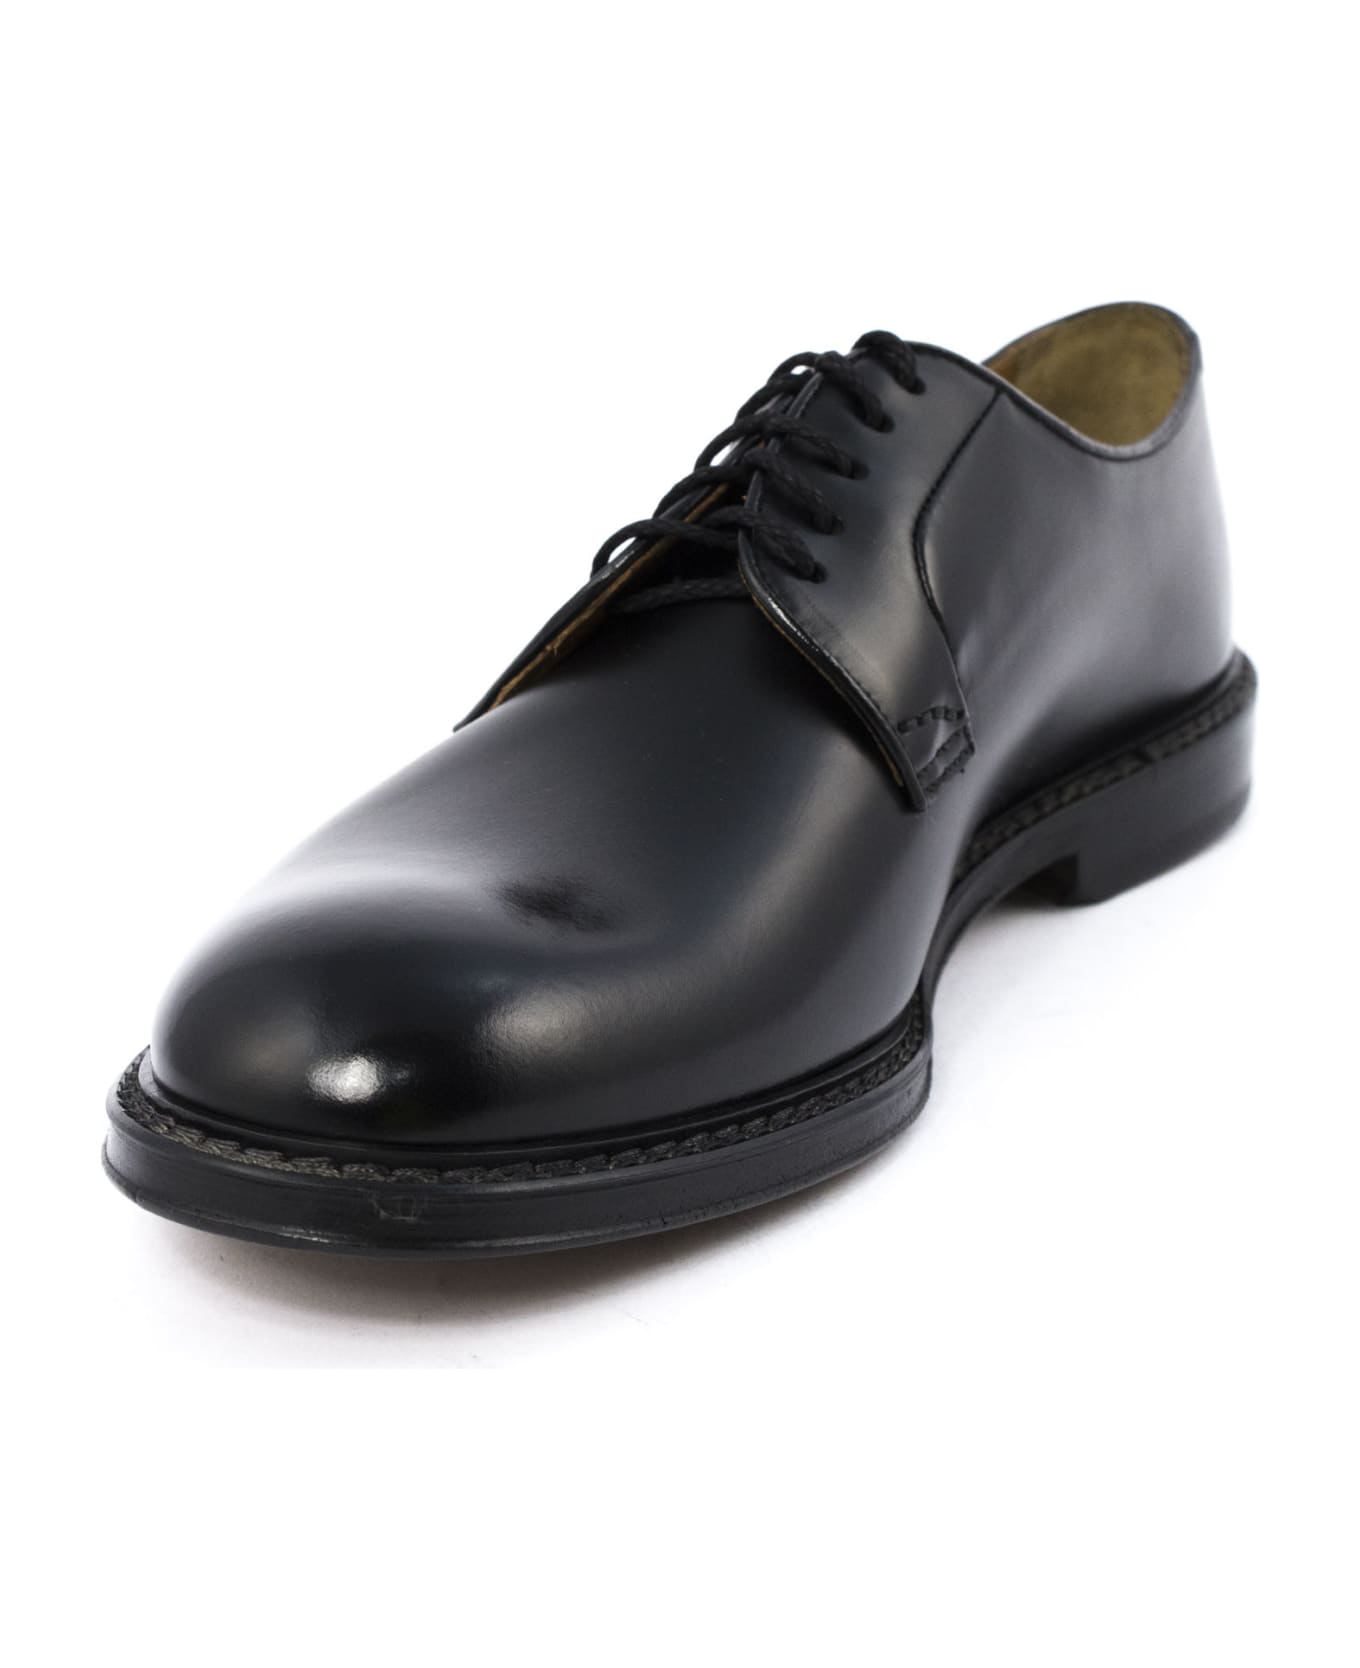 Doucal's Black Semi-glossy Leather Derby Shoes - Black ローファー＆デッキシューズ